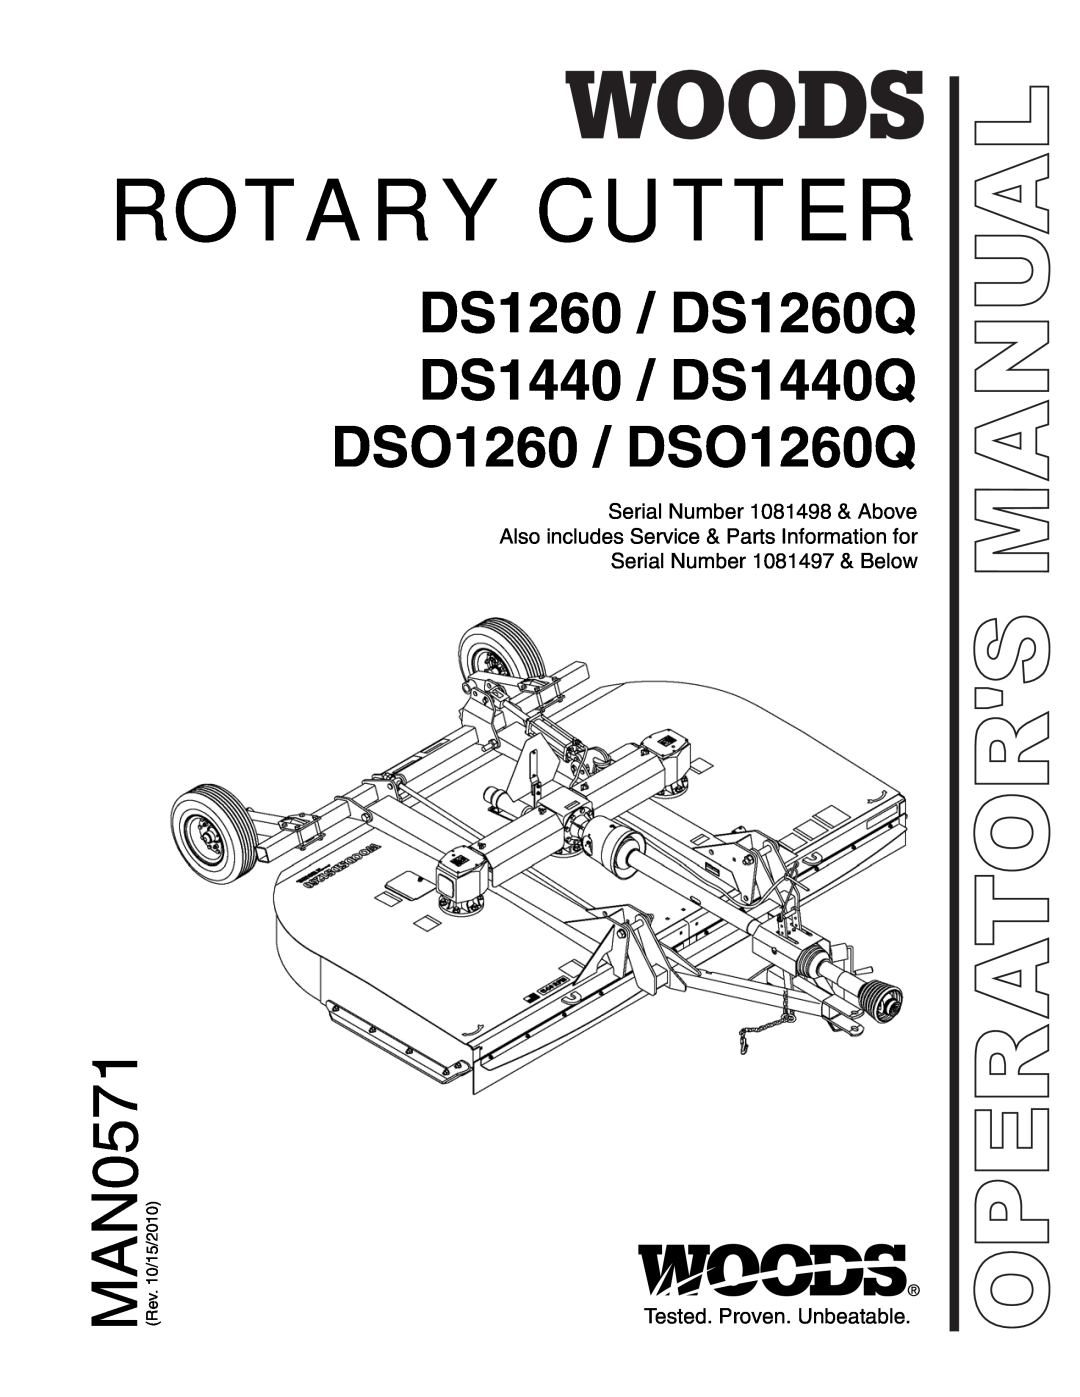 Woods Equipment manual Rotary Cutter, MAN0571, DS1260 / DS1260Q DS1440 / DS1440Q DSO1260 / DSO1260Q, Operators Manual 